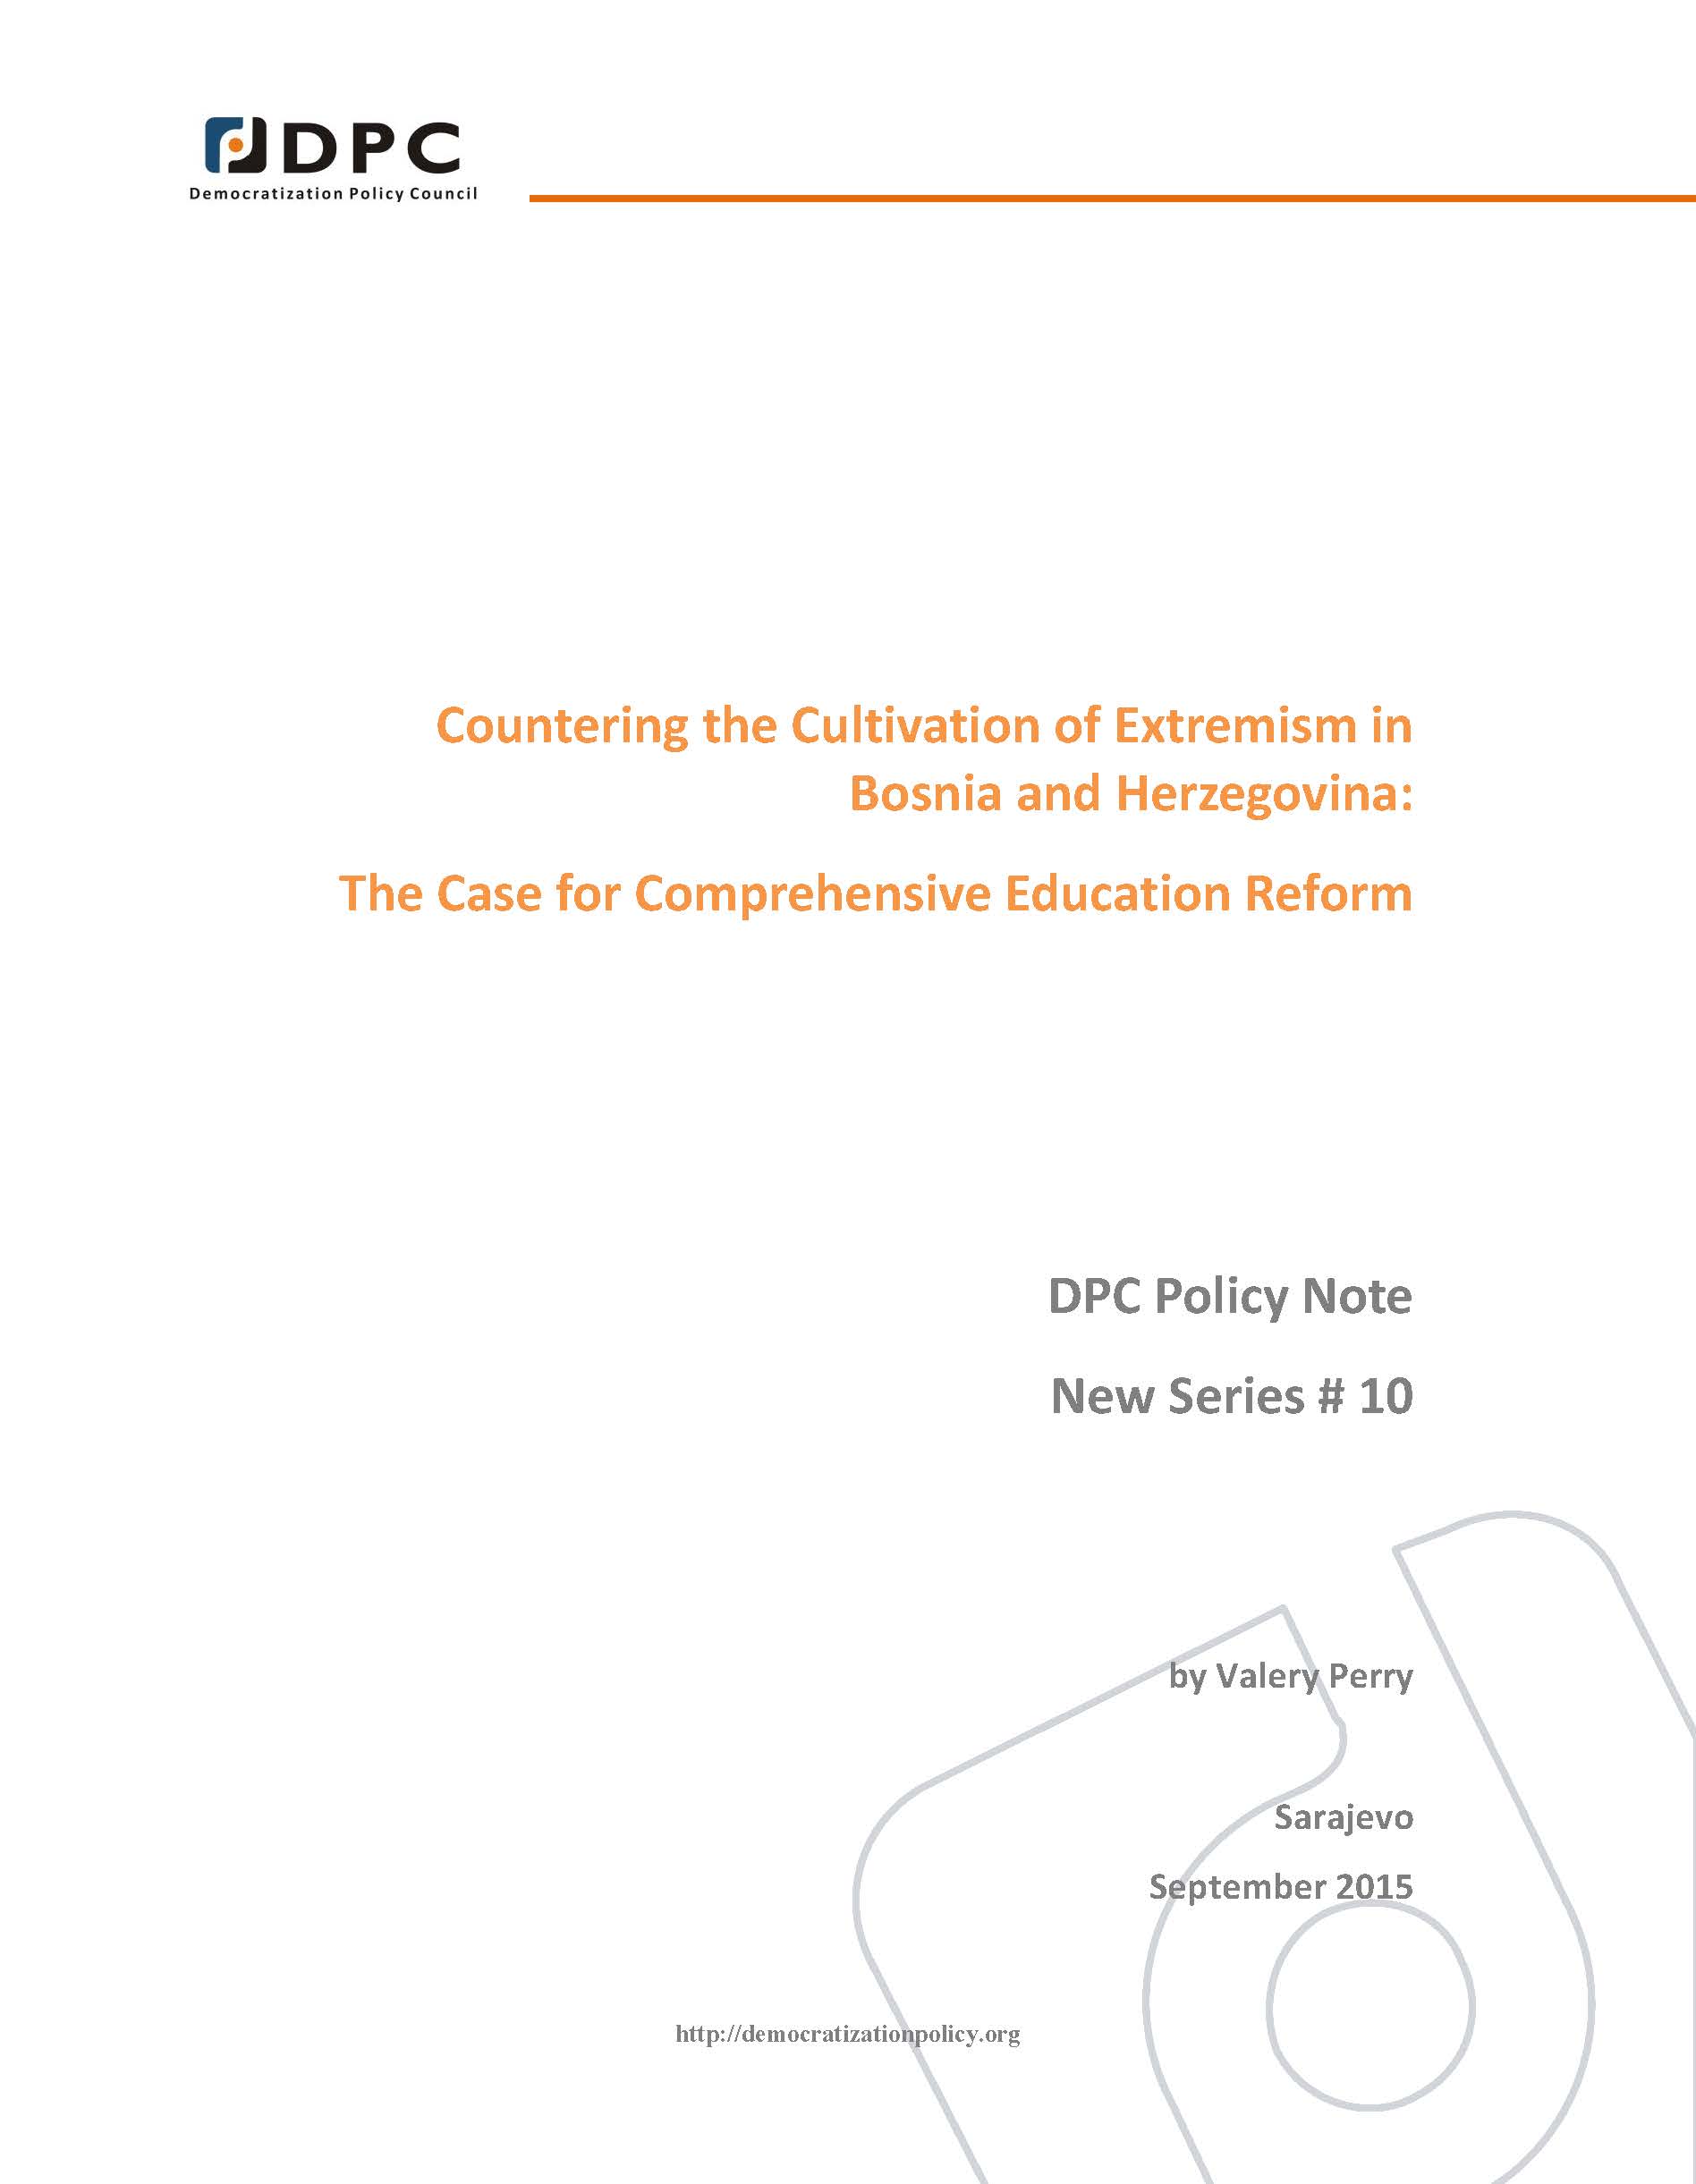 DPC POLICY NOTE 10: Countering the Cultivation of Extremism in Bosnia and Herzegovina: The Case for Comprehensive Education Reform.